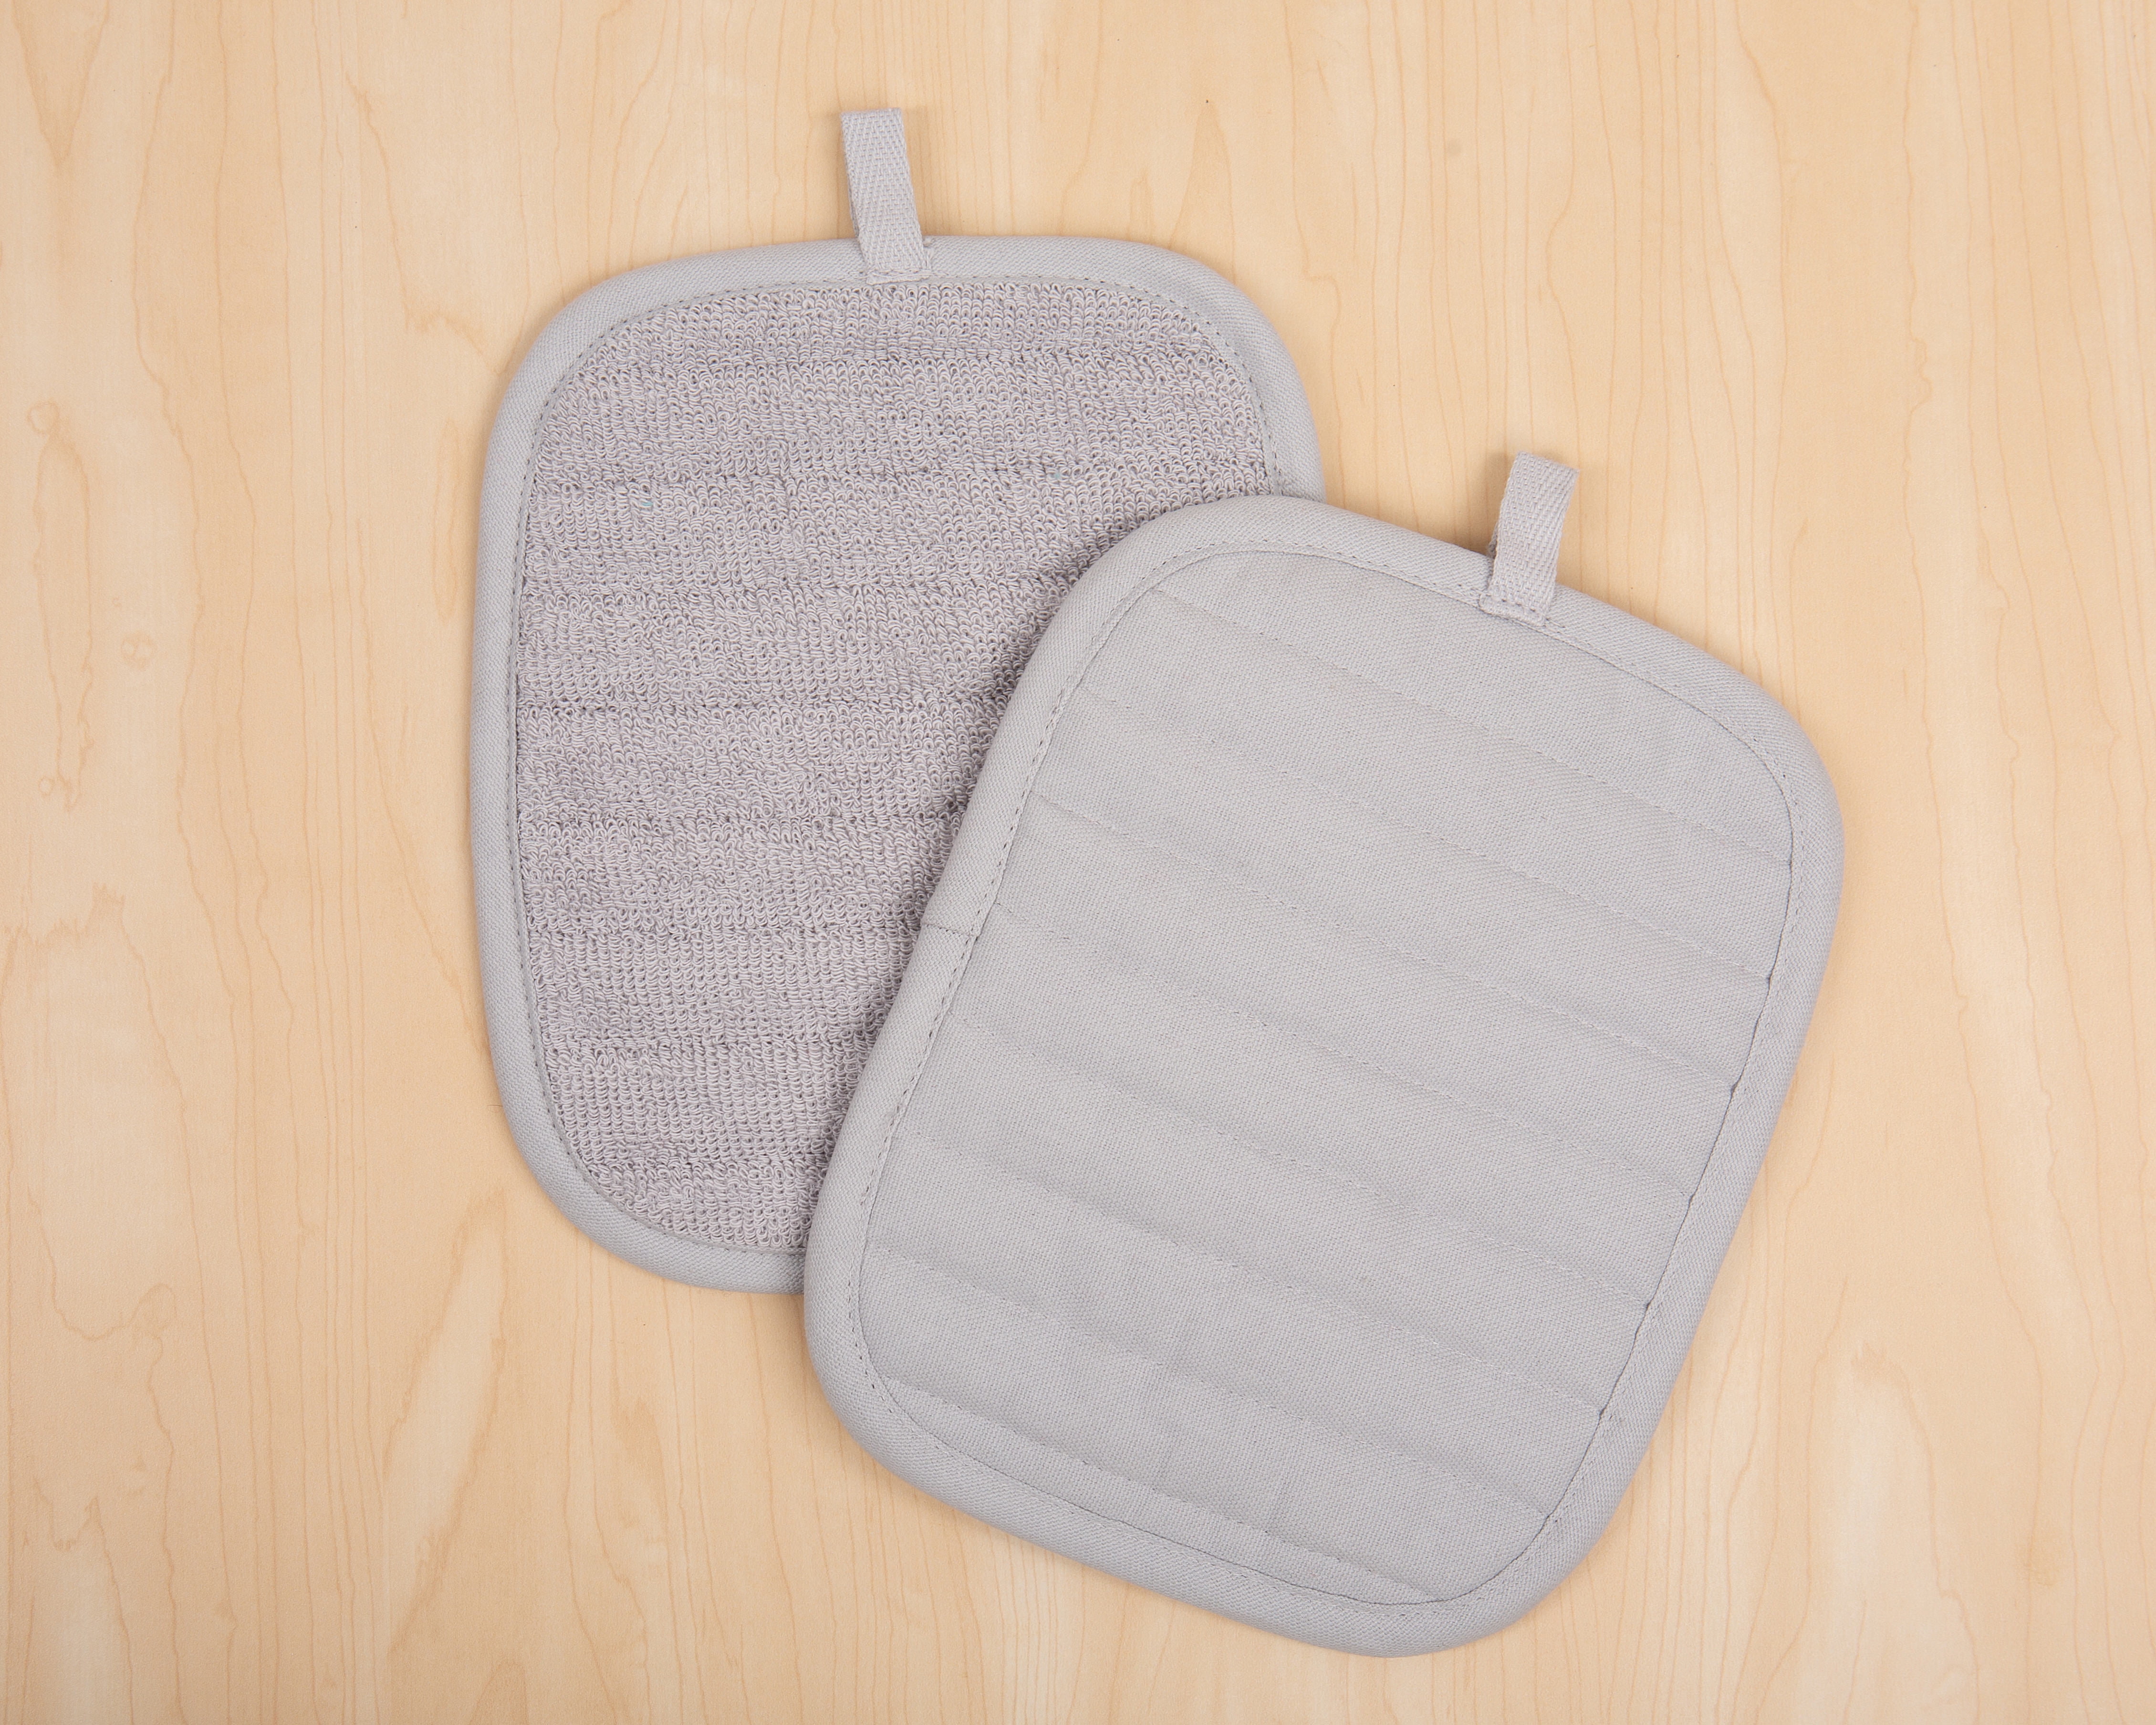 Our Table™ Select Terry Pot Holders in Grey (Set of 2), Set Of 2 - Kroger